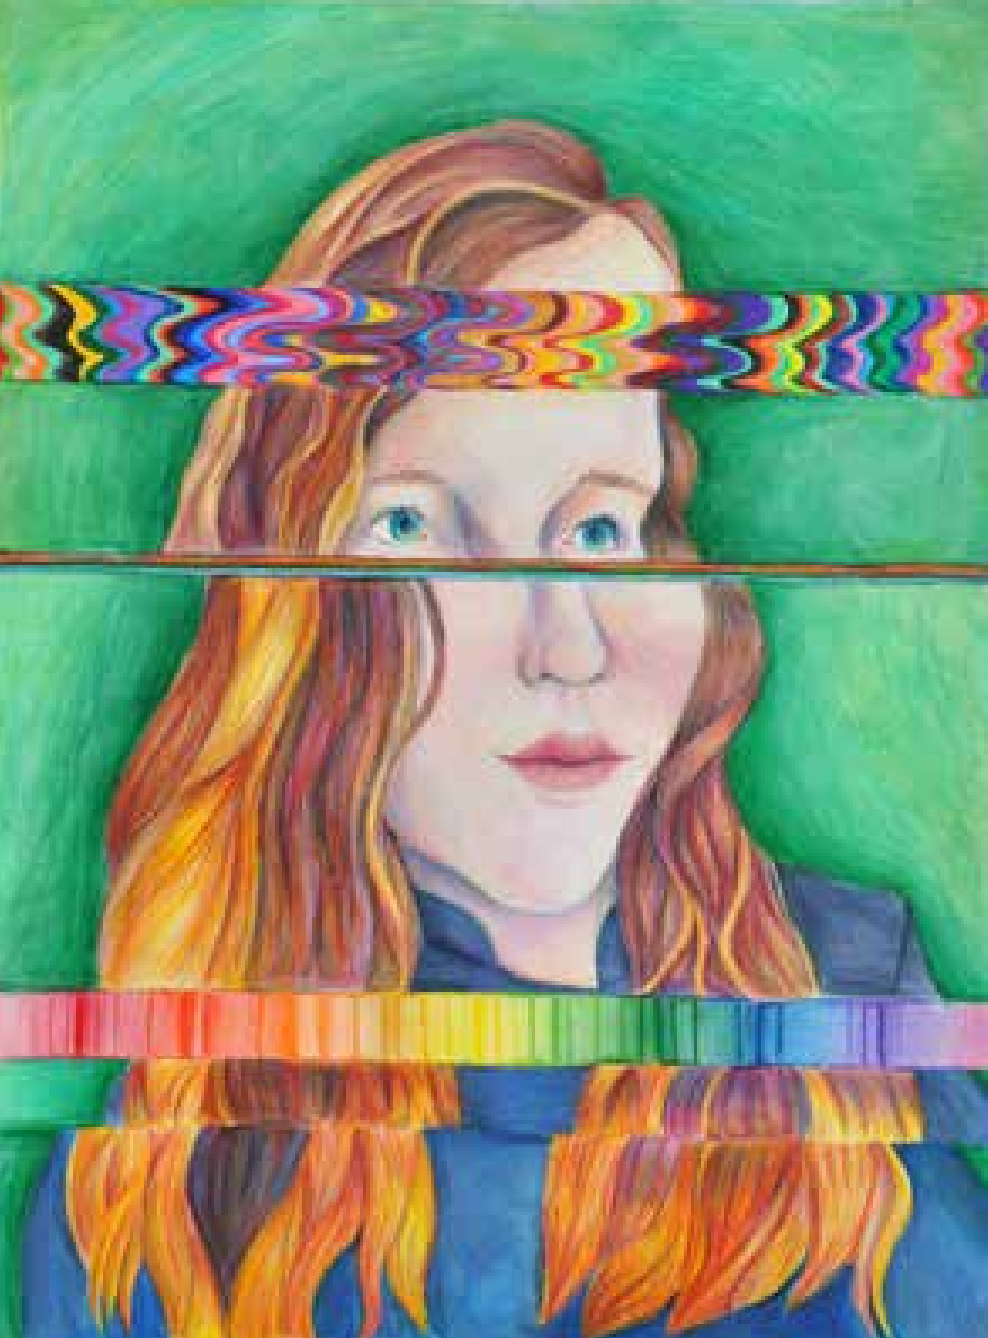  HANNAH FERGUSON Glitch  Colored pencil ArtNow 2015 Bridges Judge’s Recognition for Theme  Leigh High School  Instructor: Kimberly Bartel   ”Being in a mindset where you see yourself as the only person in the world that doesn’t have their life planne